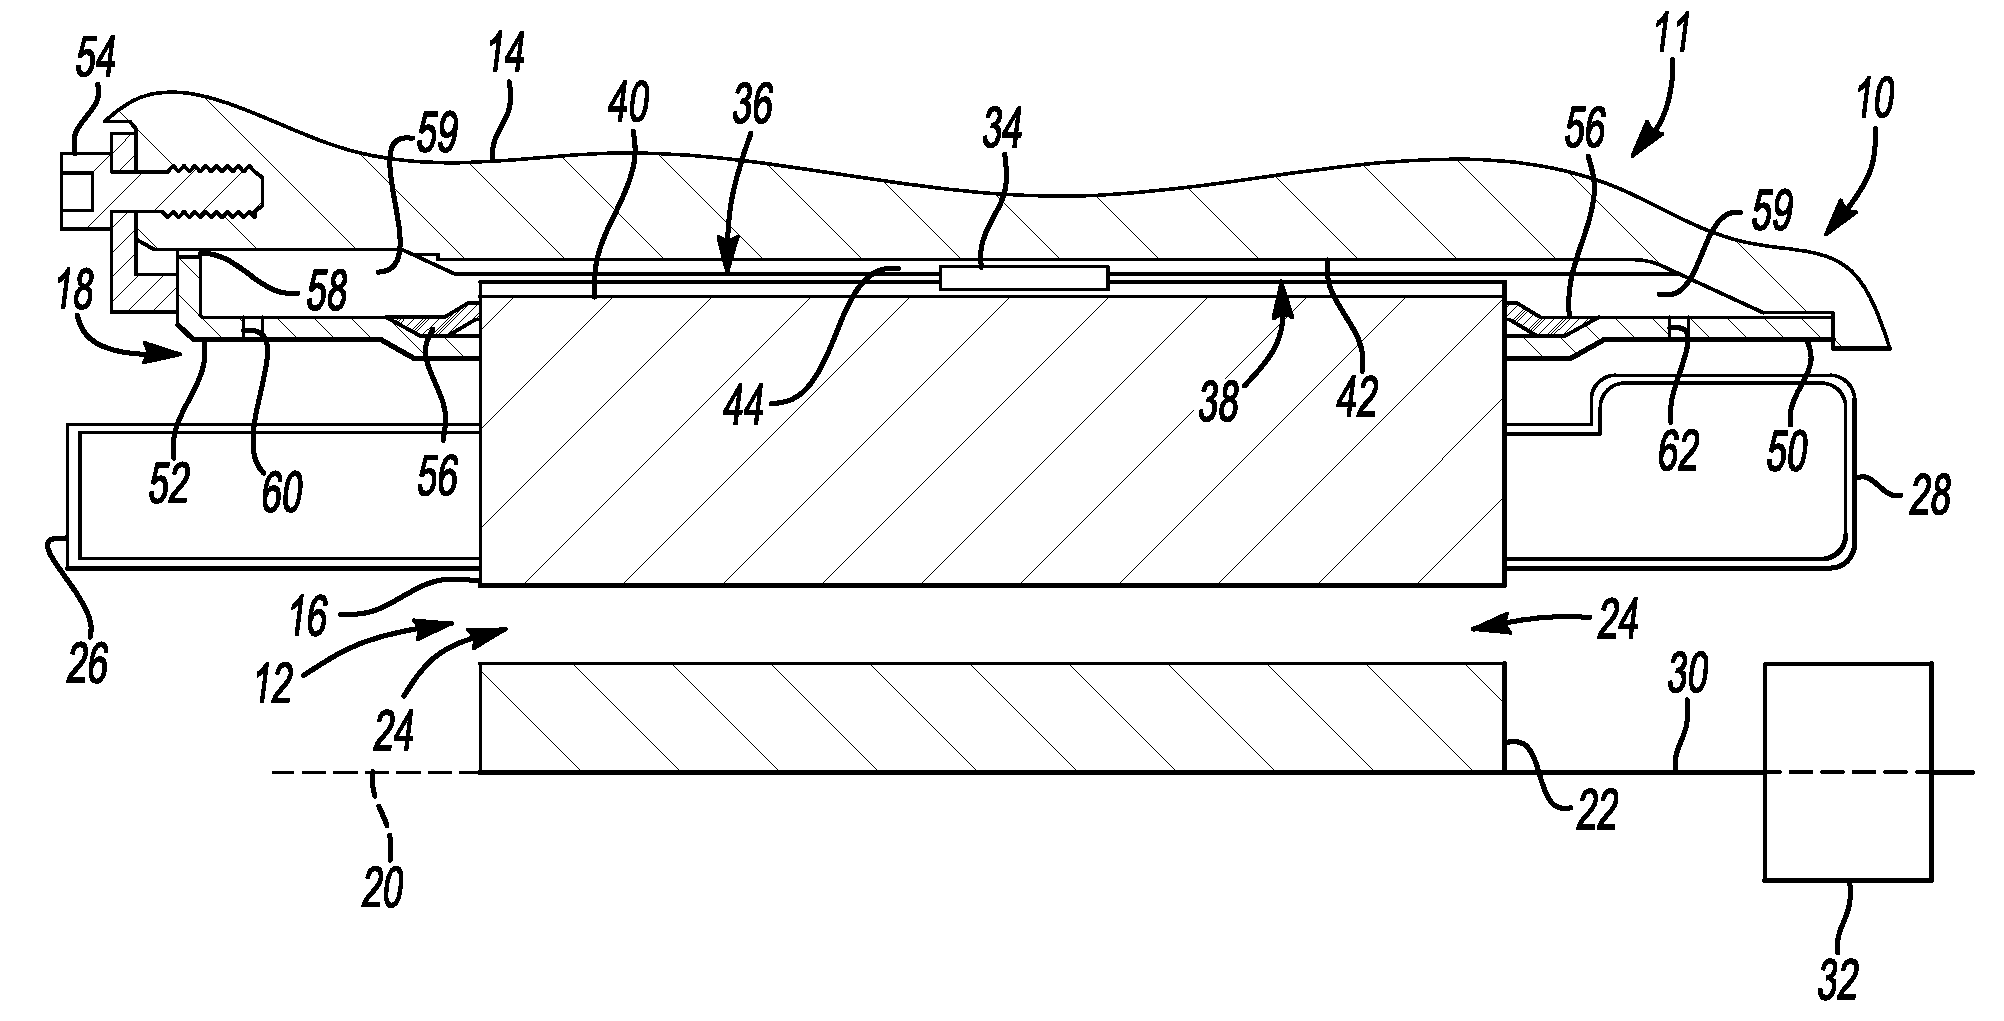 Electric motor assembly with stator mounted in vehicle powertrain housing and method